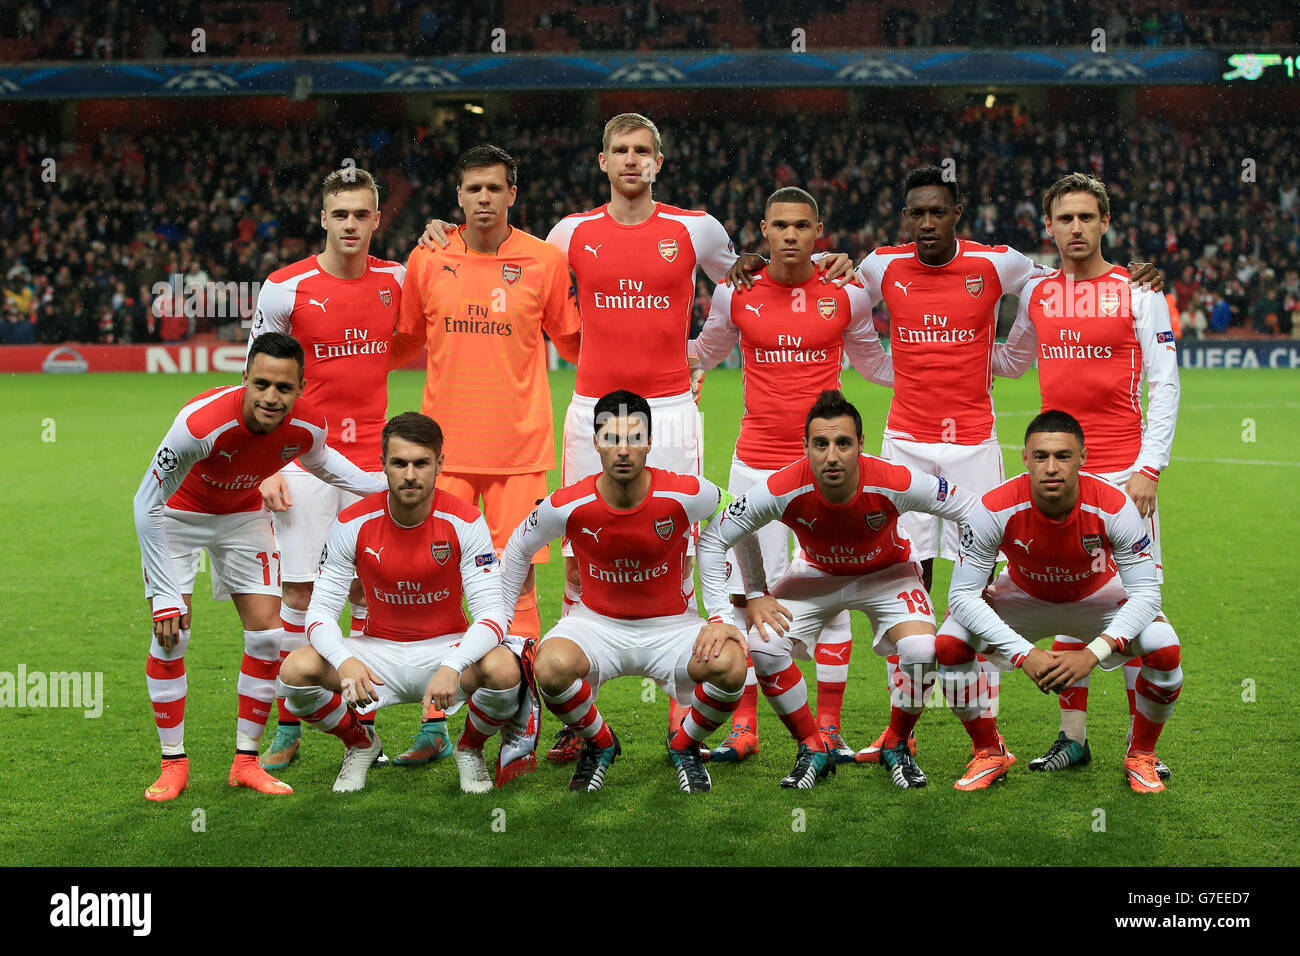 Arsenal team group (top row left to right) Calum Chambers, Wojciech Szczesny, Per Mertesacker, Kieran Gibbs, Danny Welbeck and Nacho Monreal. (bottom row left to right) Alexis Sanchez, Aaron Ramsey, Mikel Arteta, Santi Cazorla and Alex Oxlade-Chamberlain before the UEFA Champions League Group D match at Emirates Stadium, London. PRESS ASSOCIATION Photo. Picture date: Tuesday November 4, 2014. See PA story SOCCER Arsenal. Photo credit should read Nick Potts/PA Wire. Stock Photo